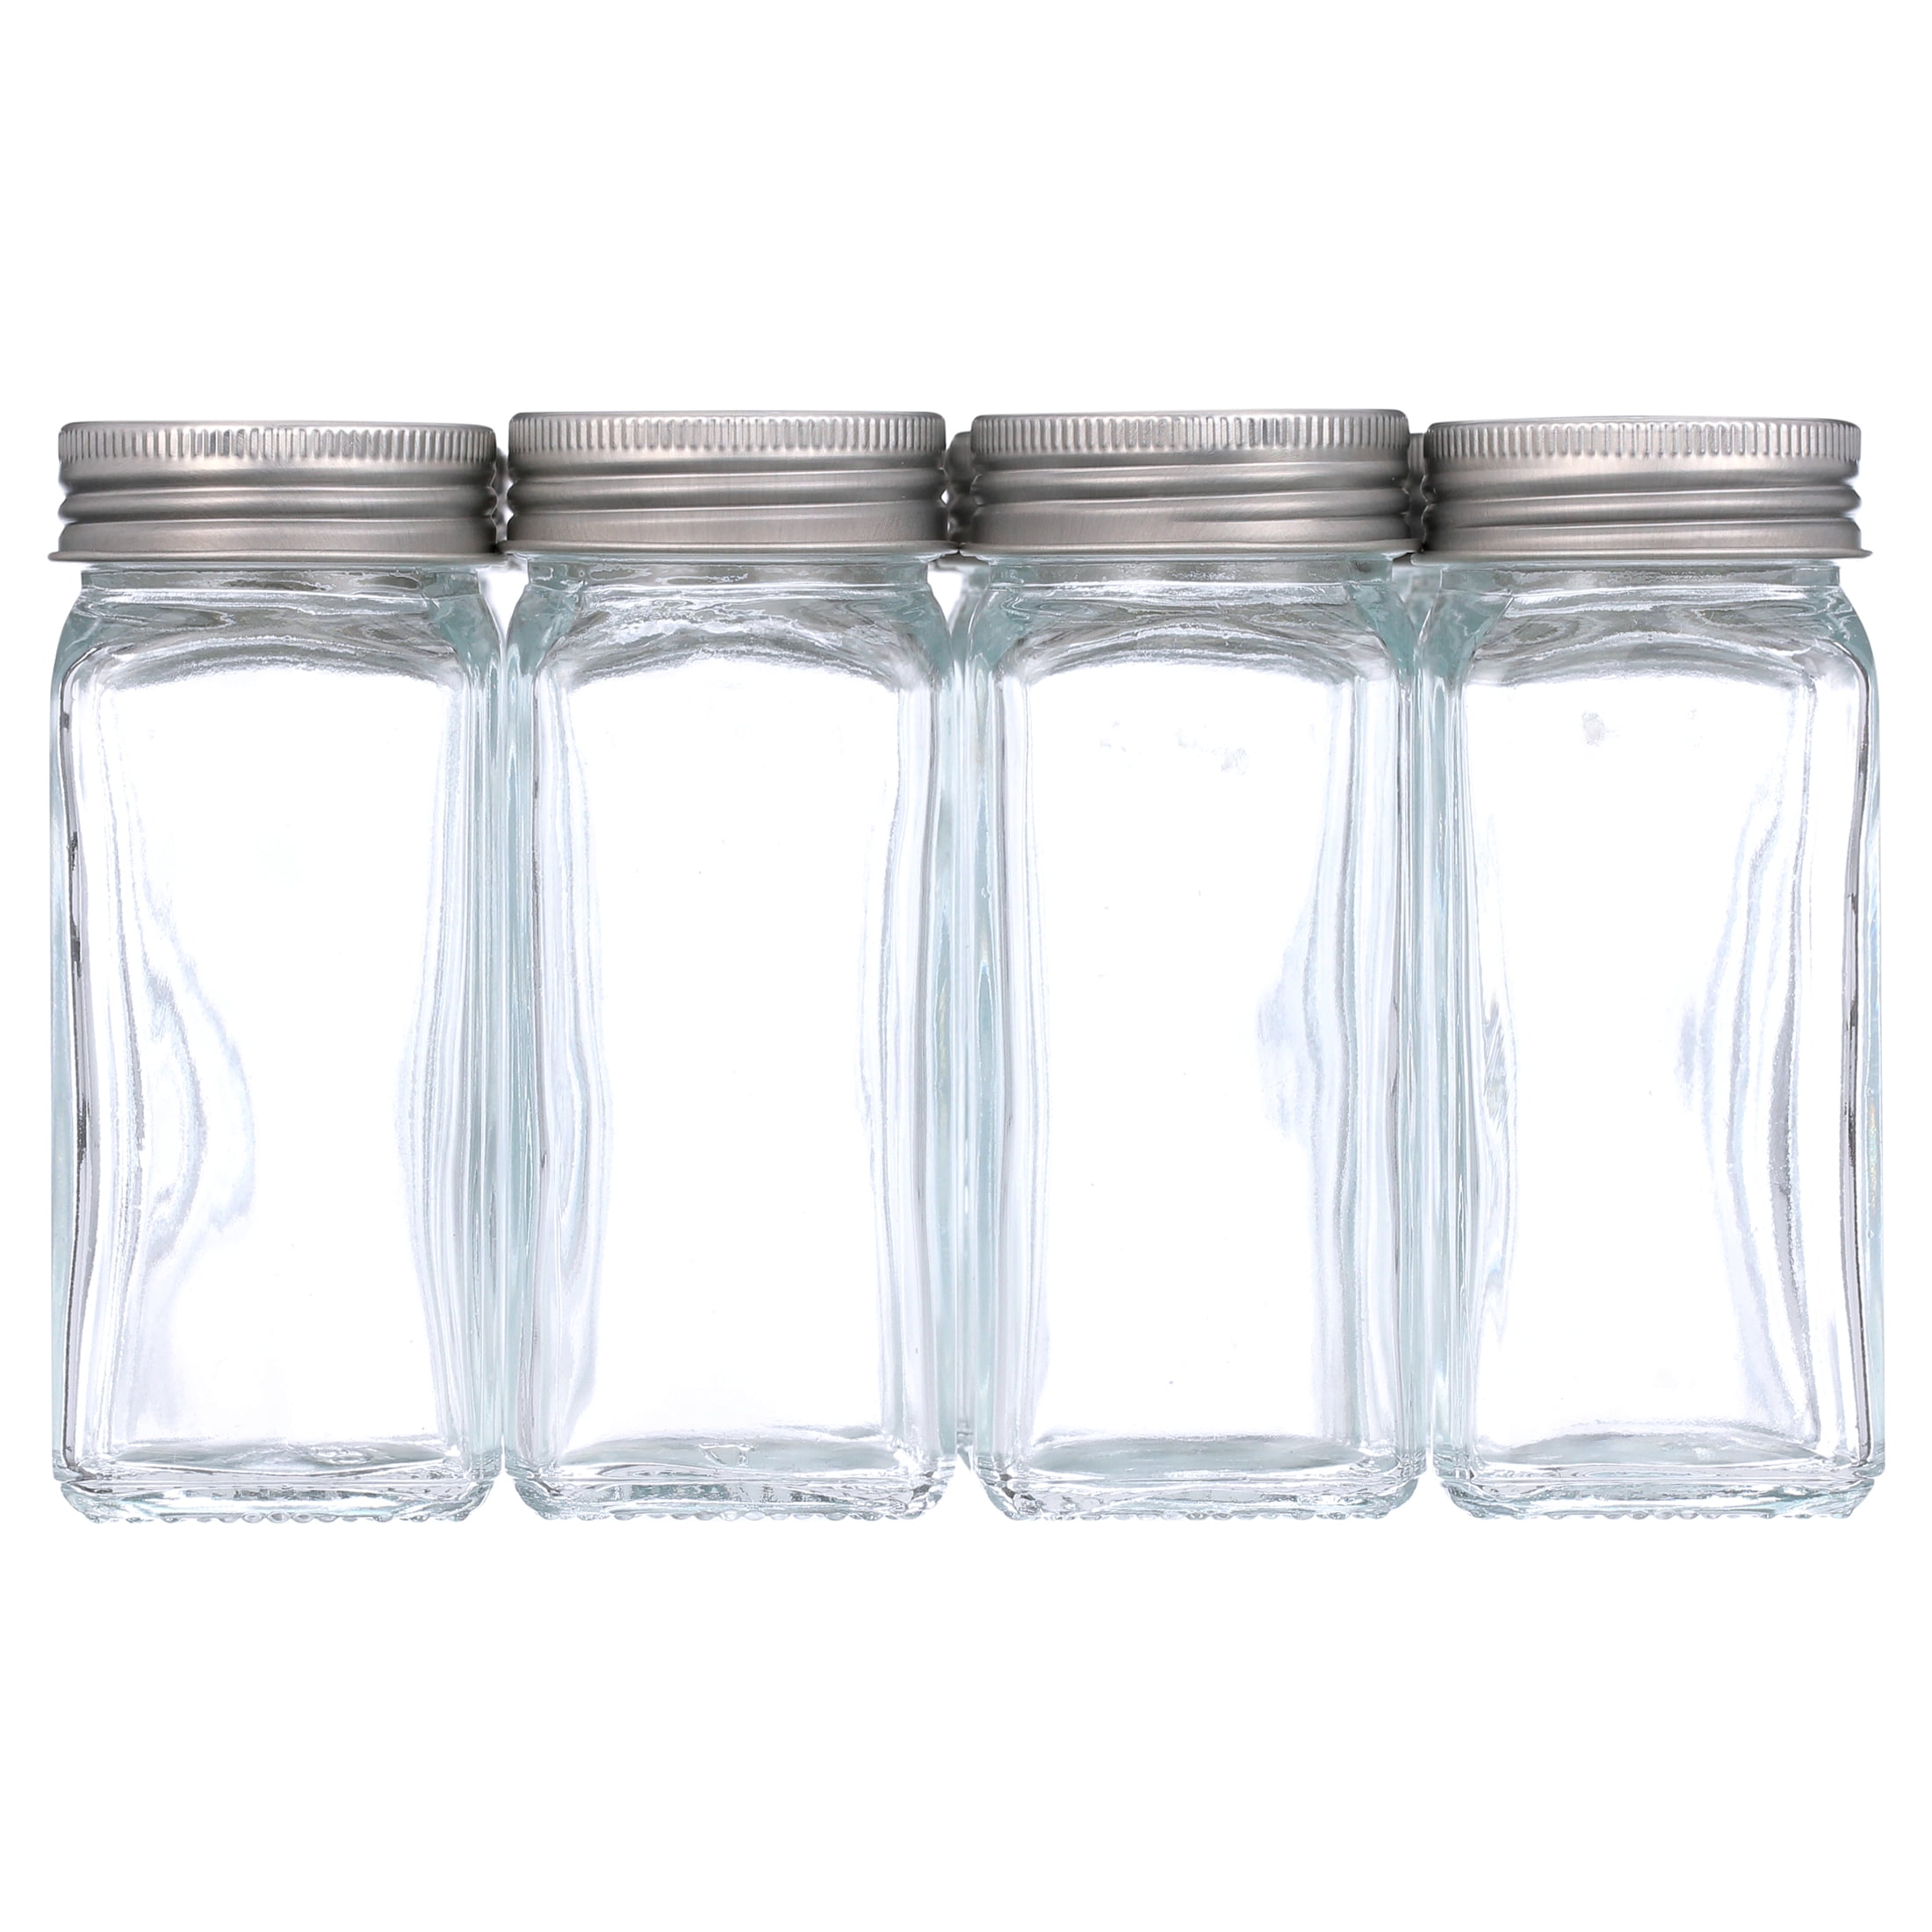 48 Pack 4 oz 120 ml Clear Glass Spice & Salts Jars Bottles, Square Glass  Seasoning Jars With Aluminum Silver Metal Caps and Pour/Sift Shaker Lid. 1  Pen,80 Black Labels and 1